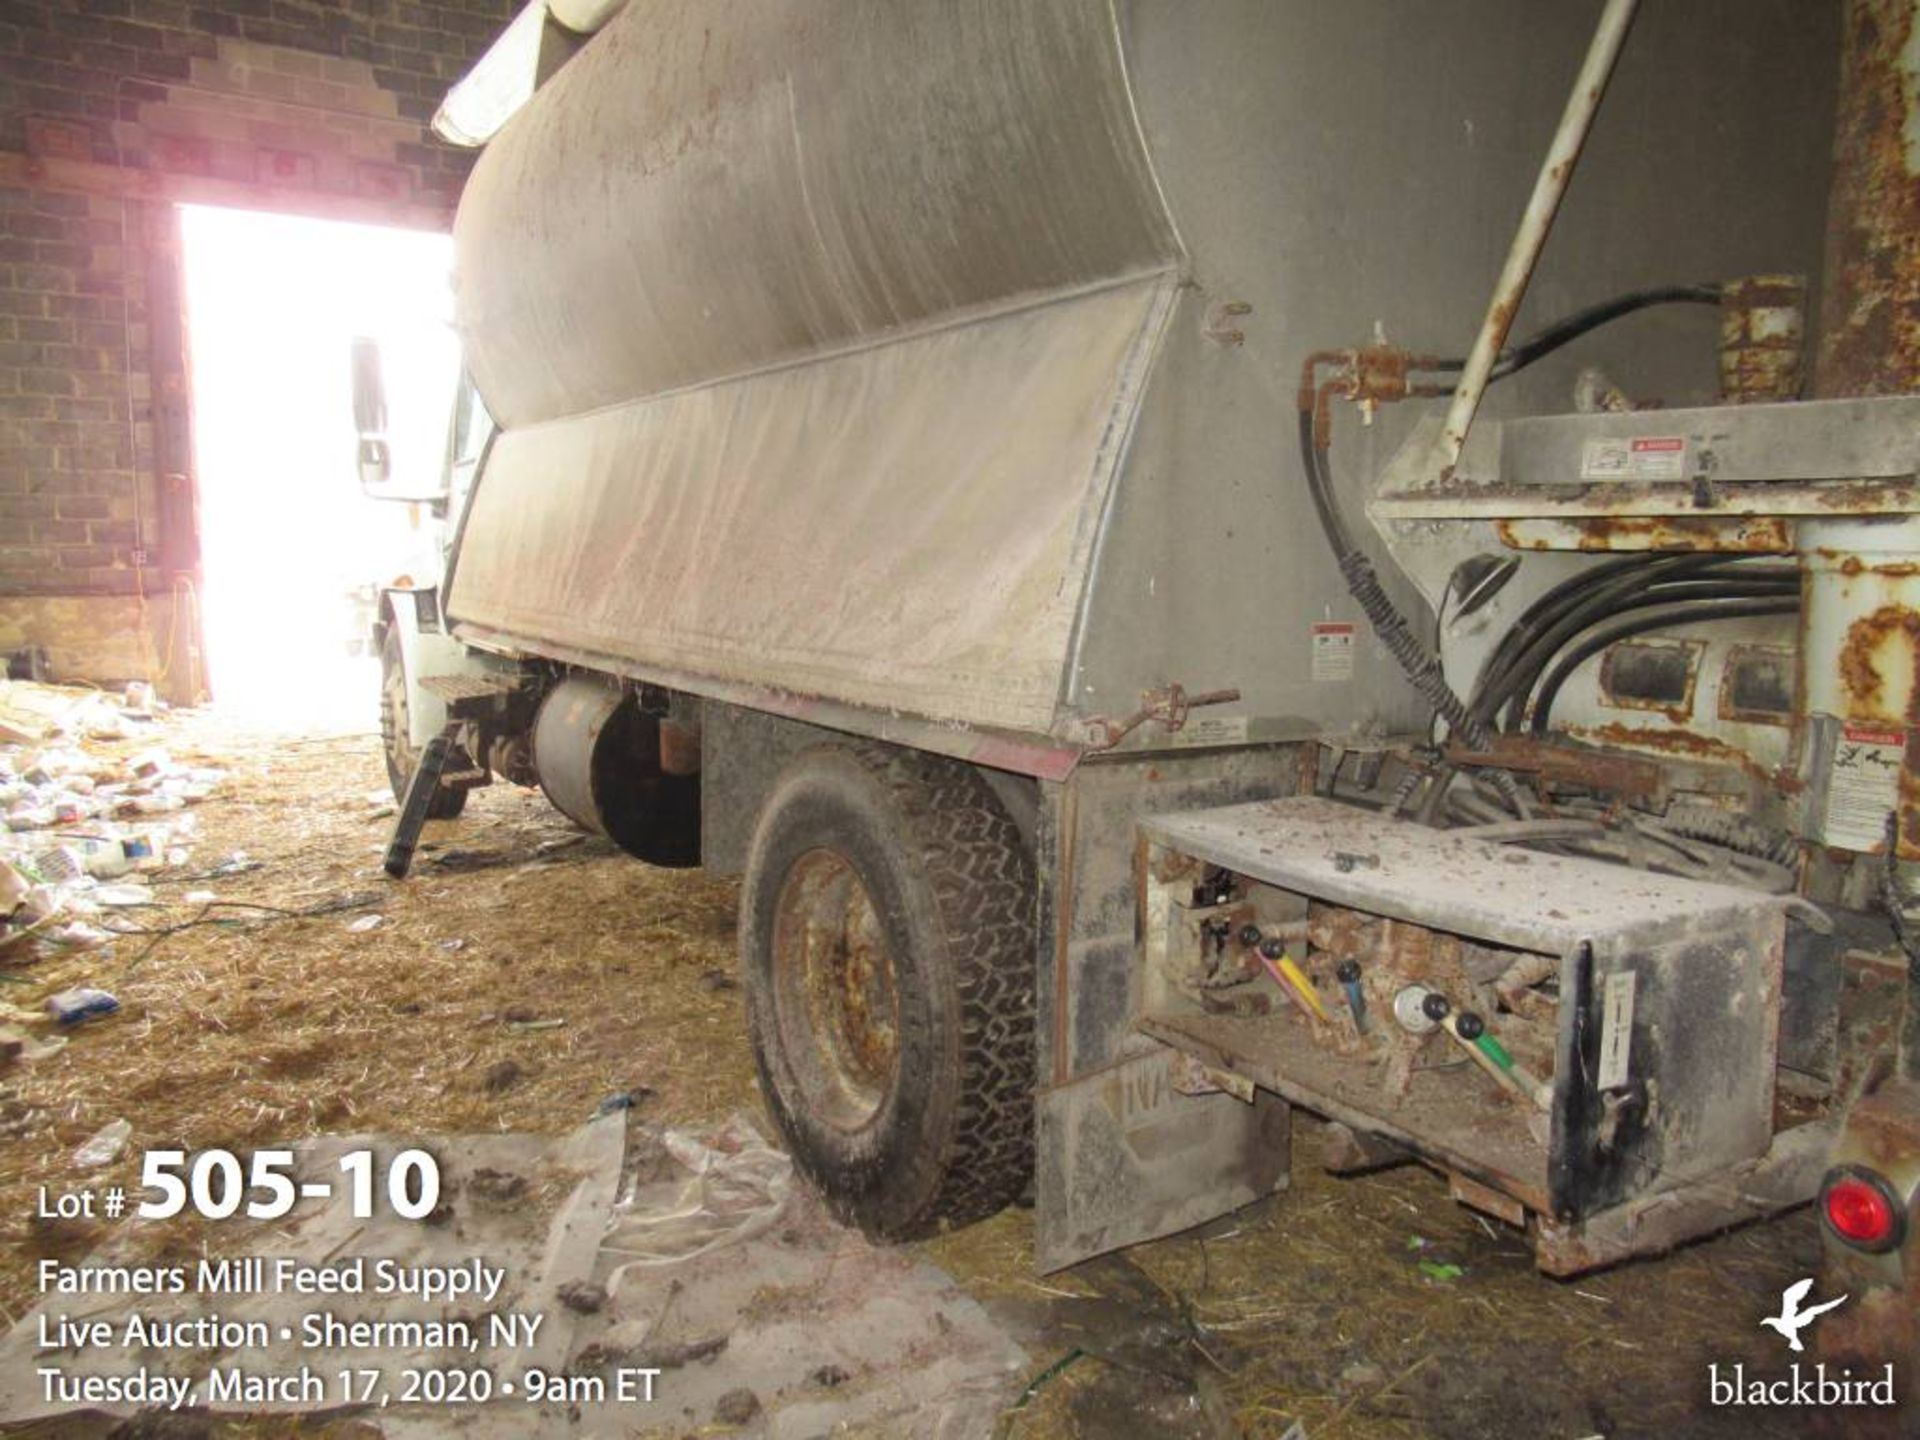 2004 International DT530 feed truck - Image 11 of 18